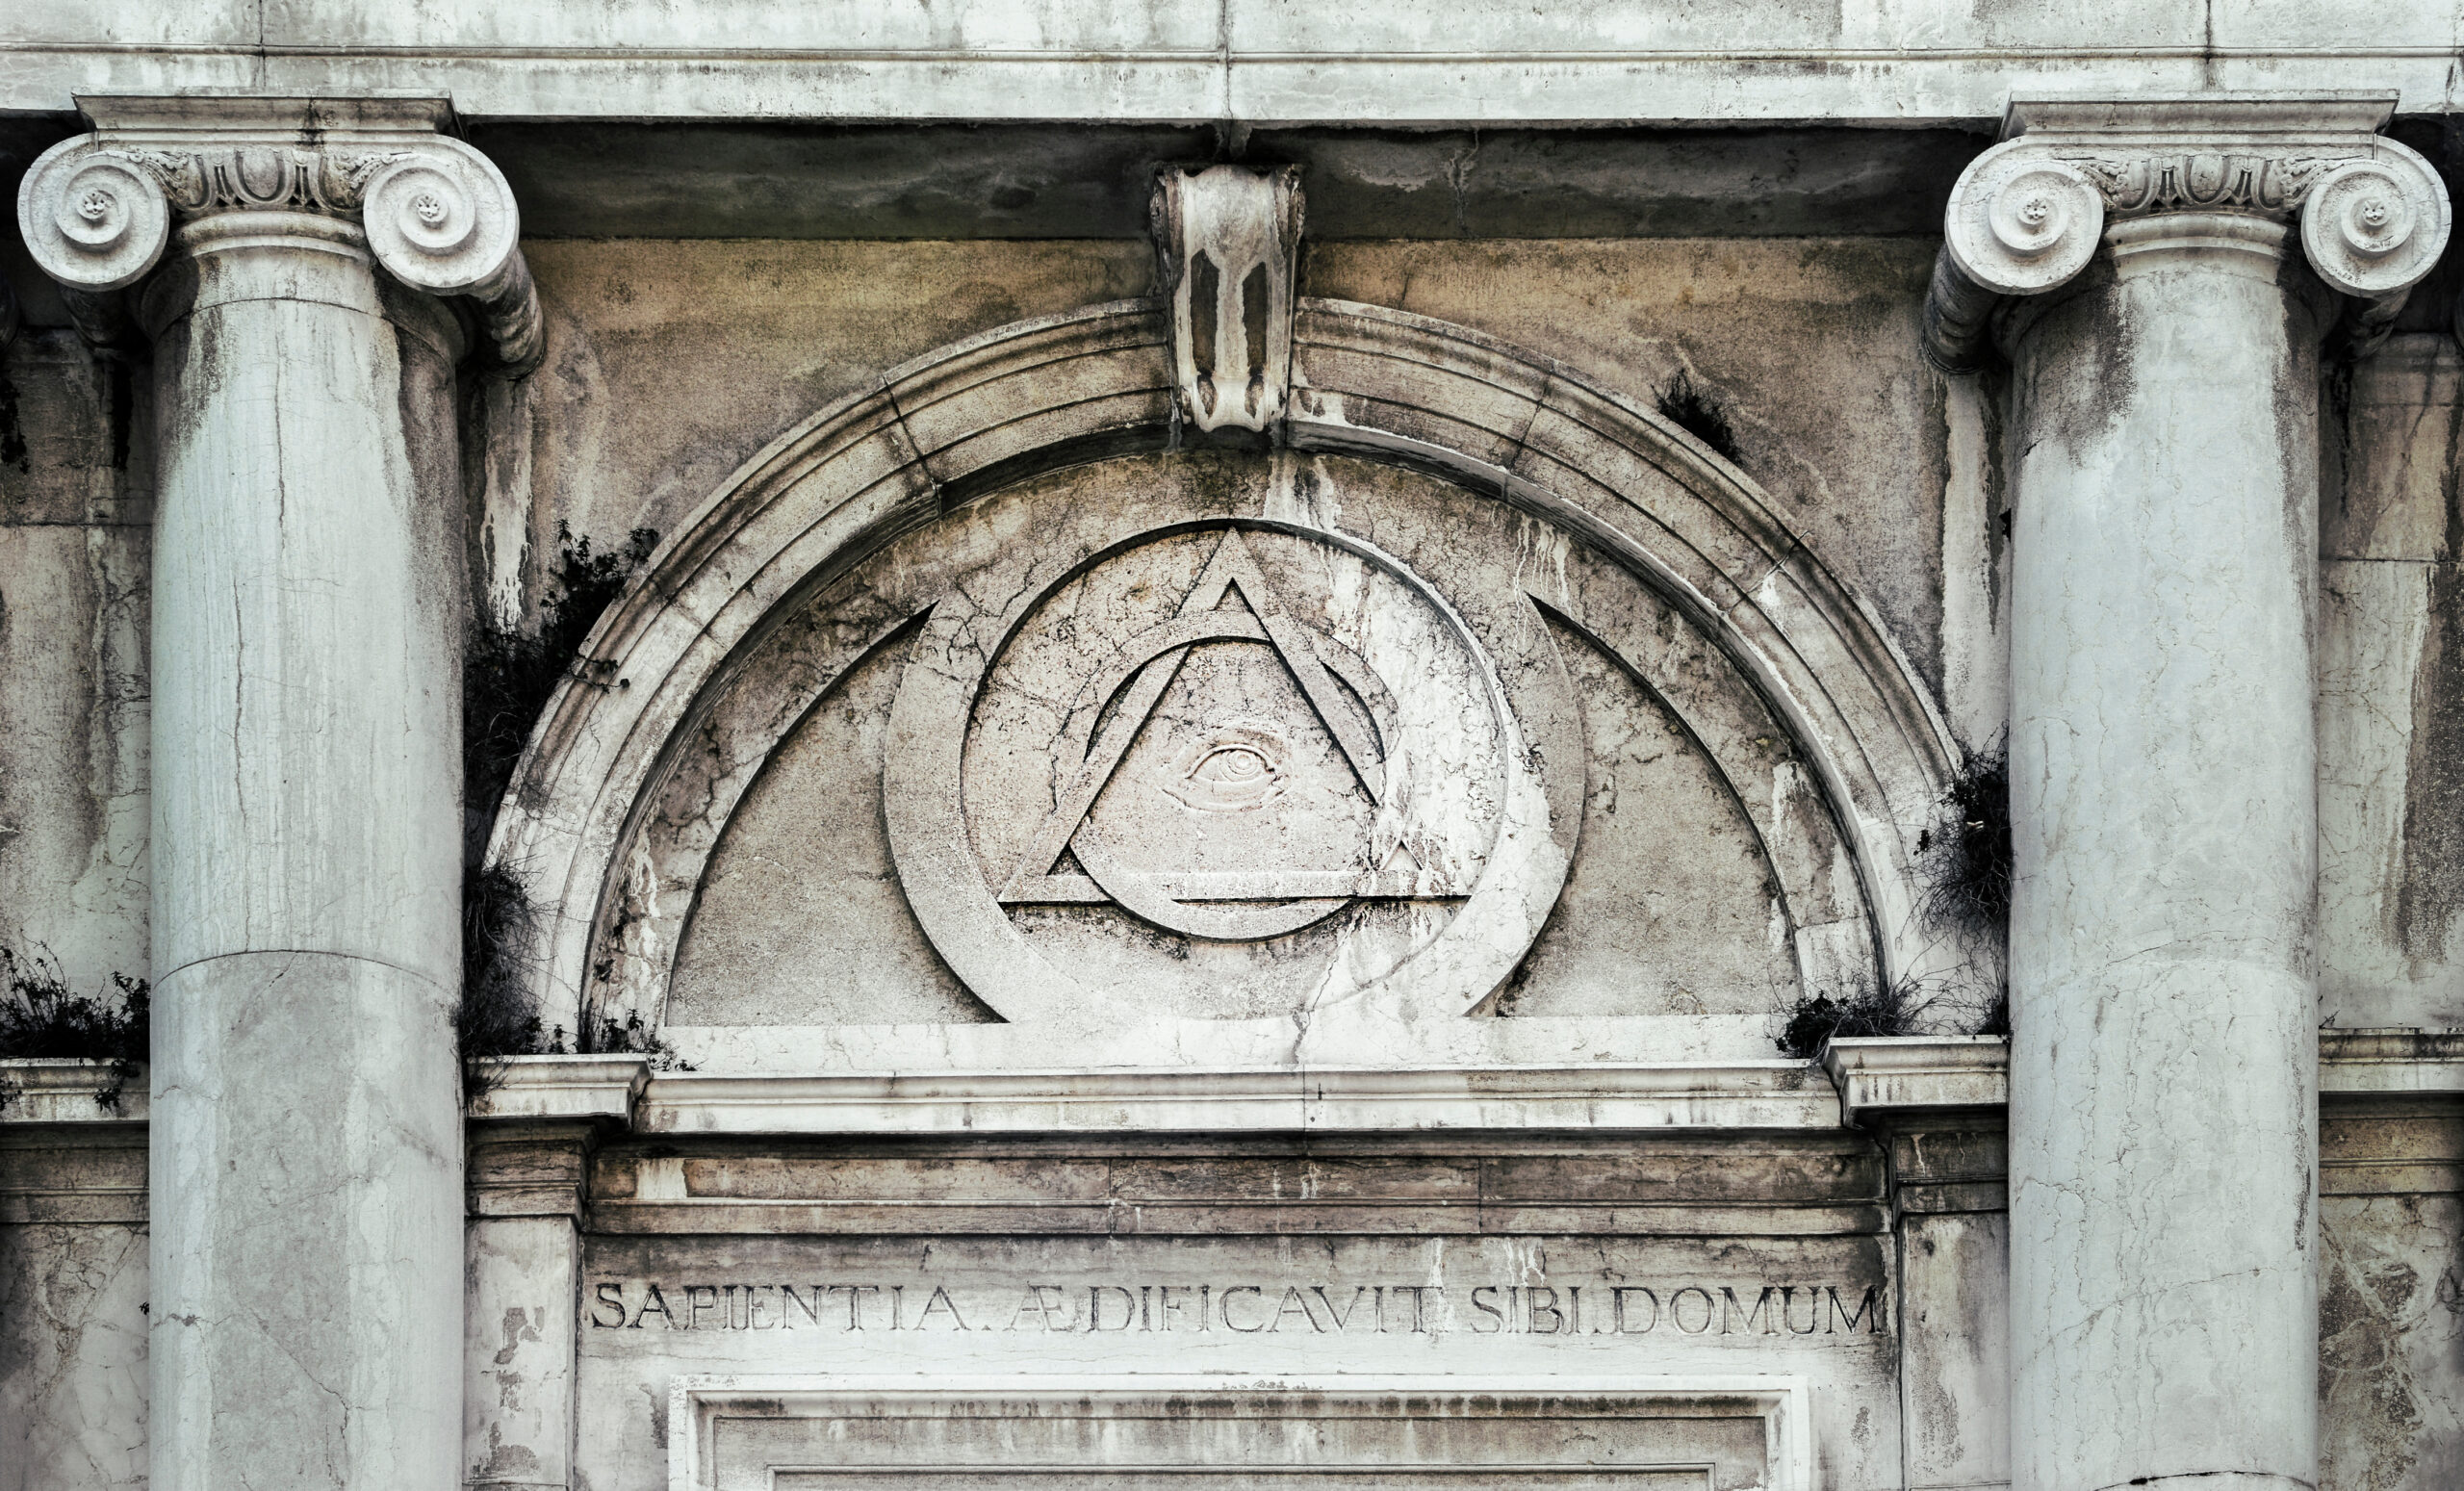 Eye of Providence, inside triangle interlaced with circle above doorway of building in Venice, Italy - It represents the eye of God watching over humanity, or divine providence.